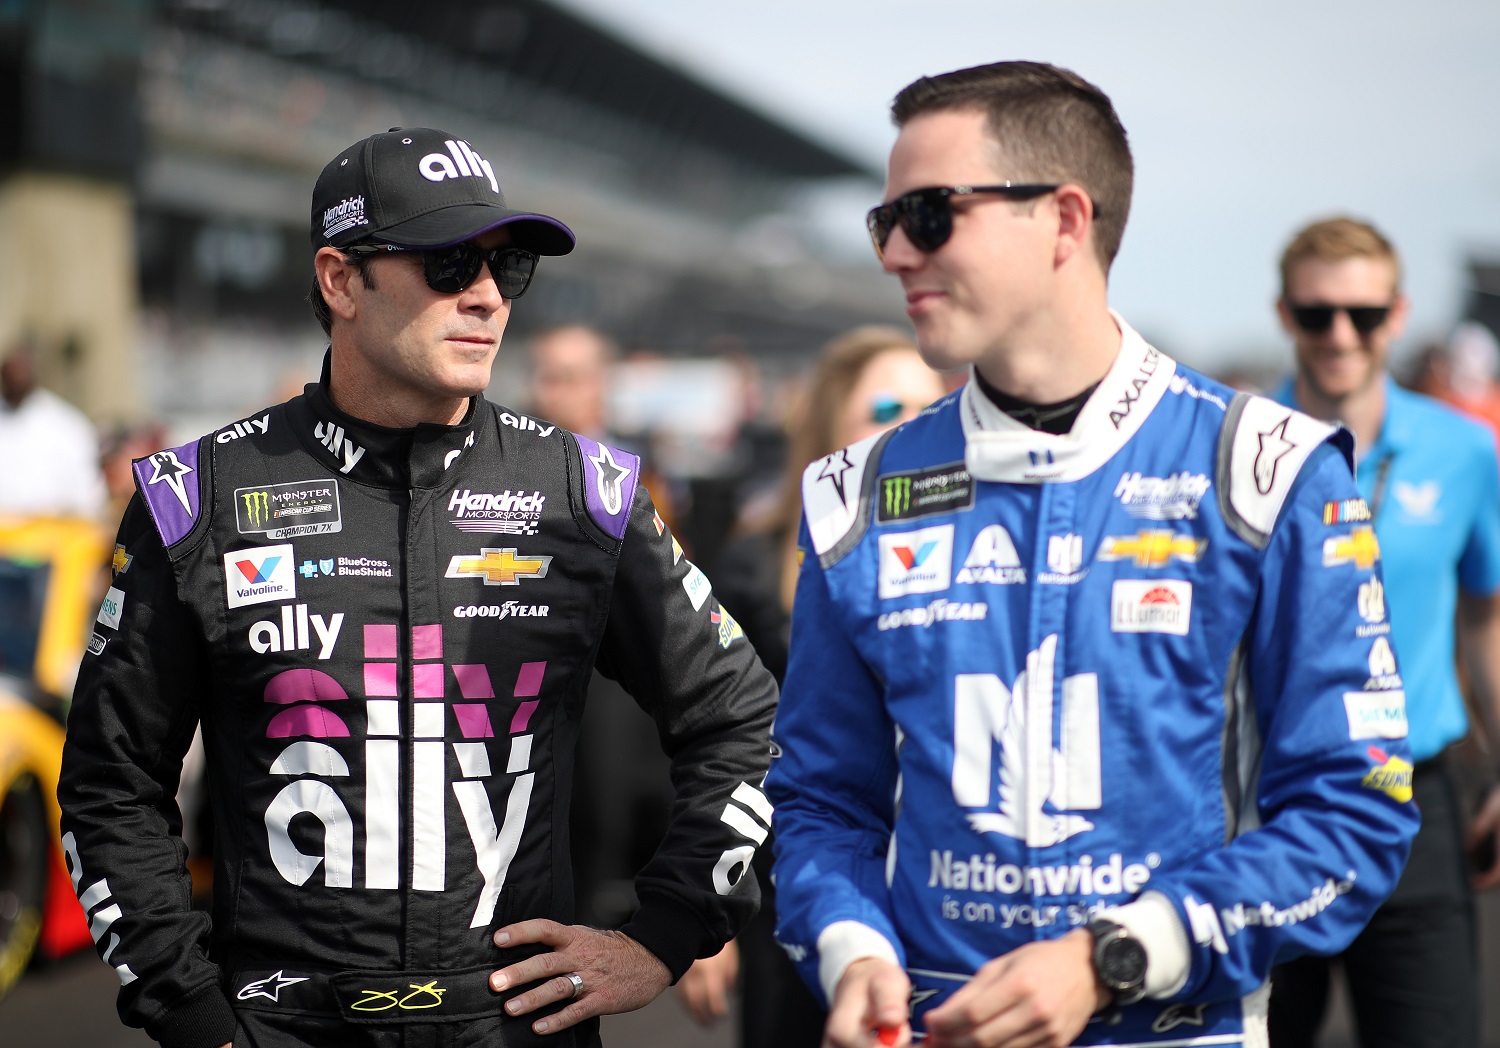 Alex Bowman talks with Jimmie Johnson during qualifying for the NASCAR Cup Series Big Machine Vodka 400 at the Brickyard at Indianapolis Motor Speedway on Sept. 8, 2019 in Indianapolis, Indiana.